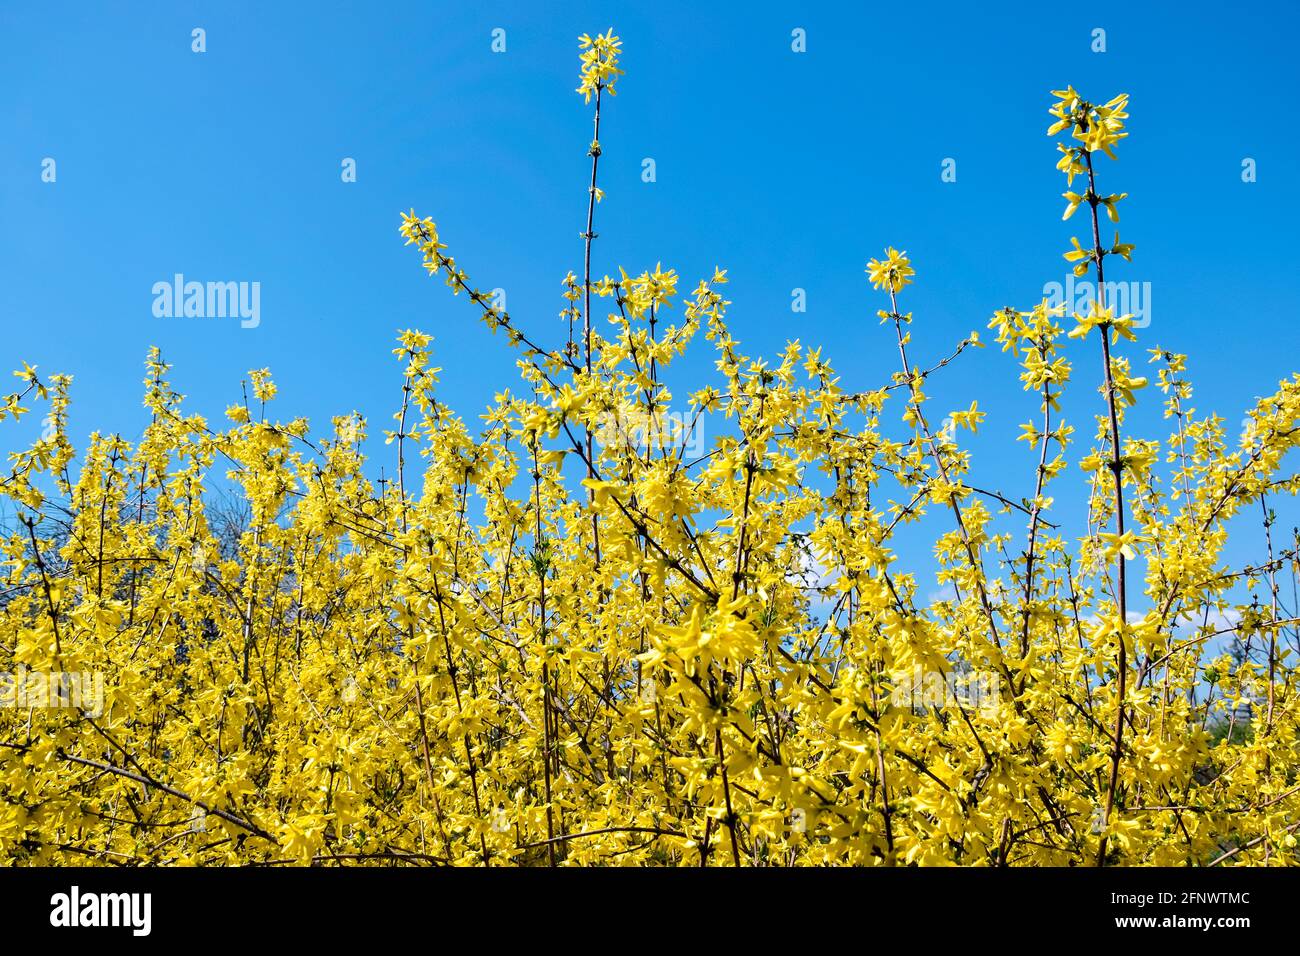 Bright yellow flowering of Forsythia against blue sky. Shrub from family of Olives (Oleaceae). Most forsythia species originate from China. Copy space Stock Photo